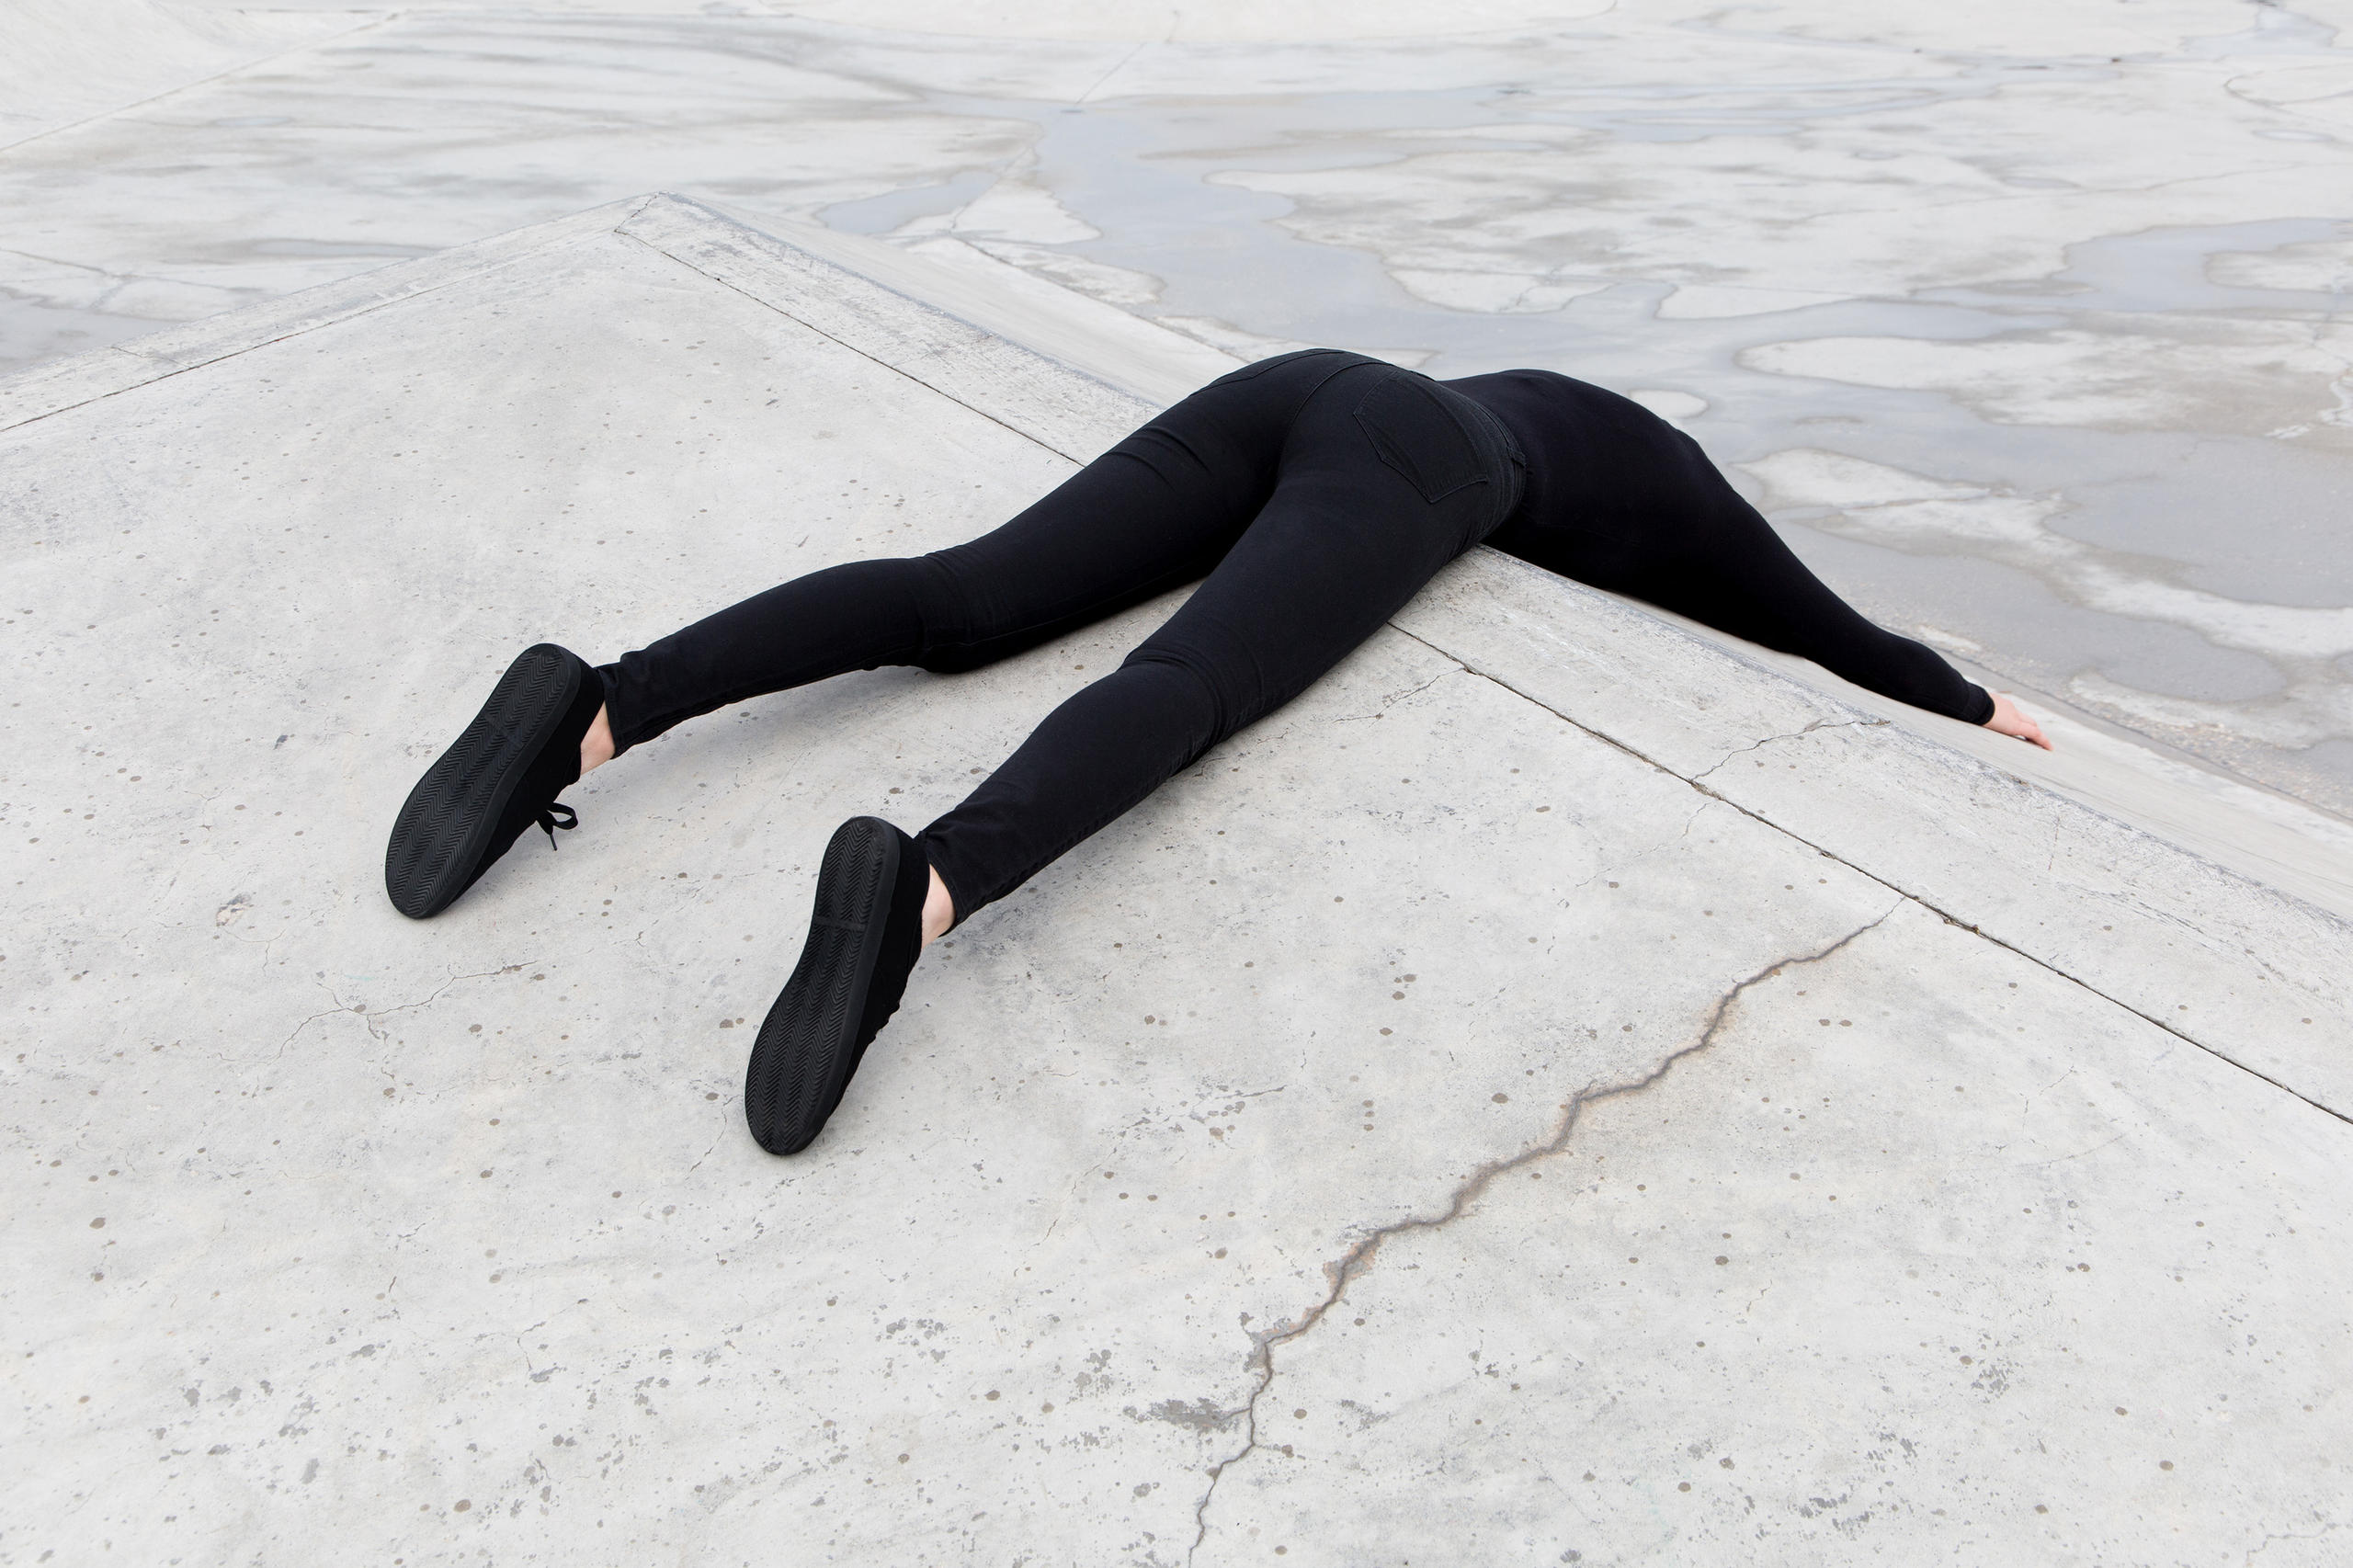 Person dressed in black lying face down